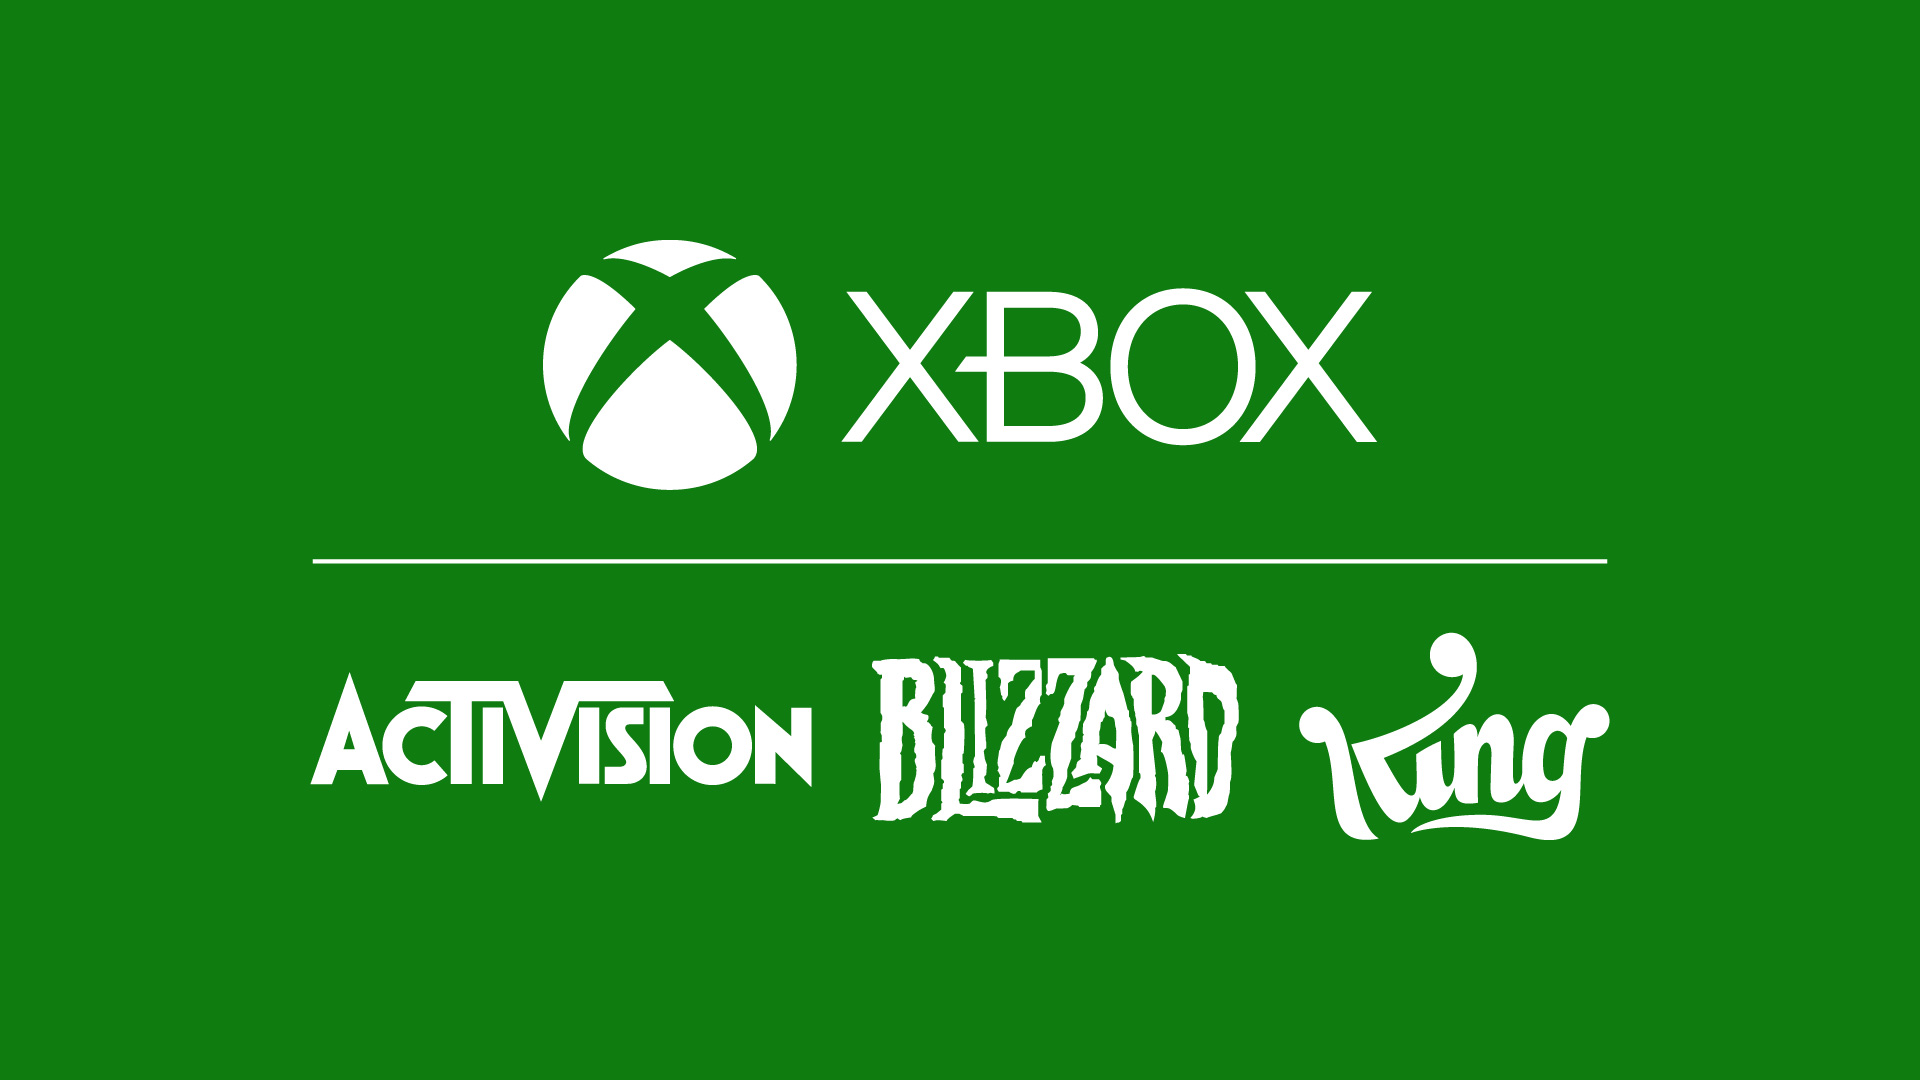 Activision Blizzard joins Xbox Game Studios following Microsoft merger